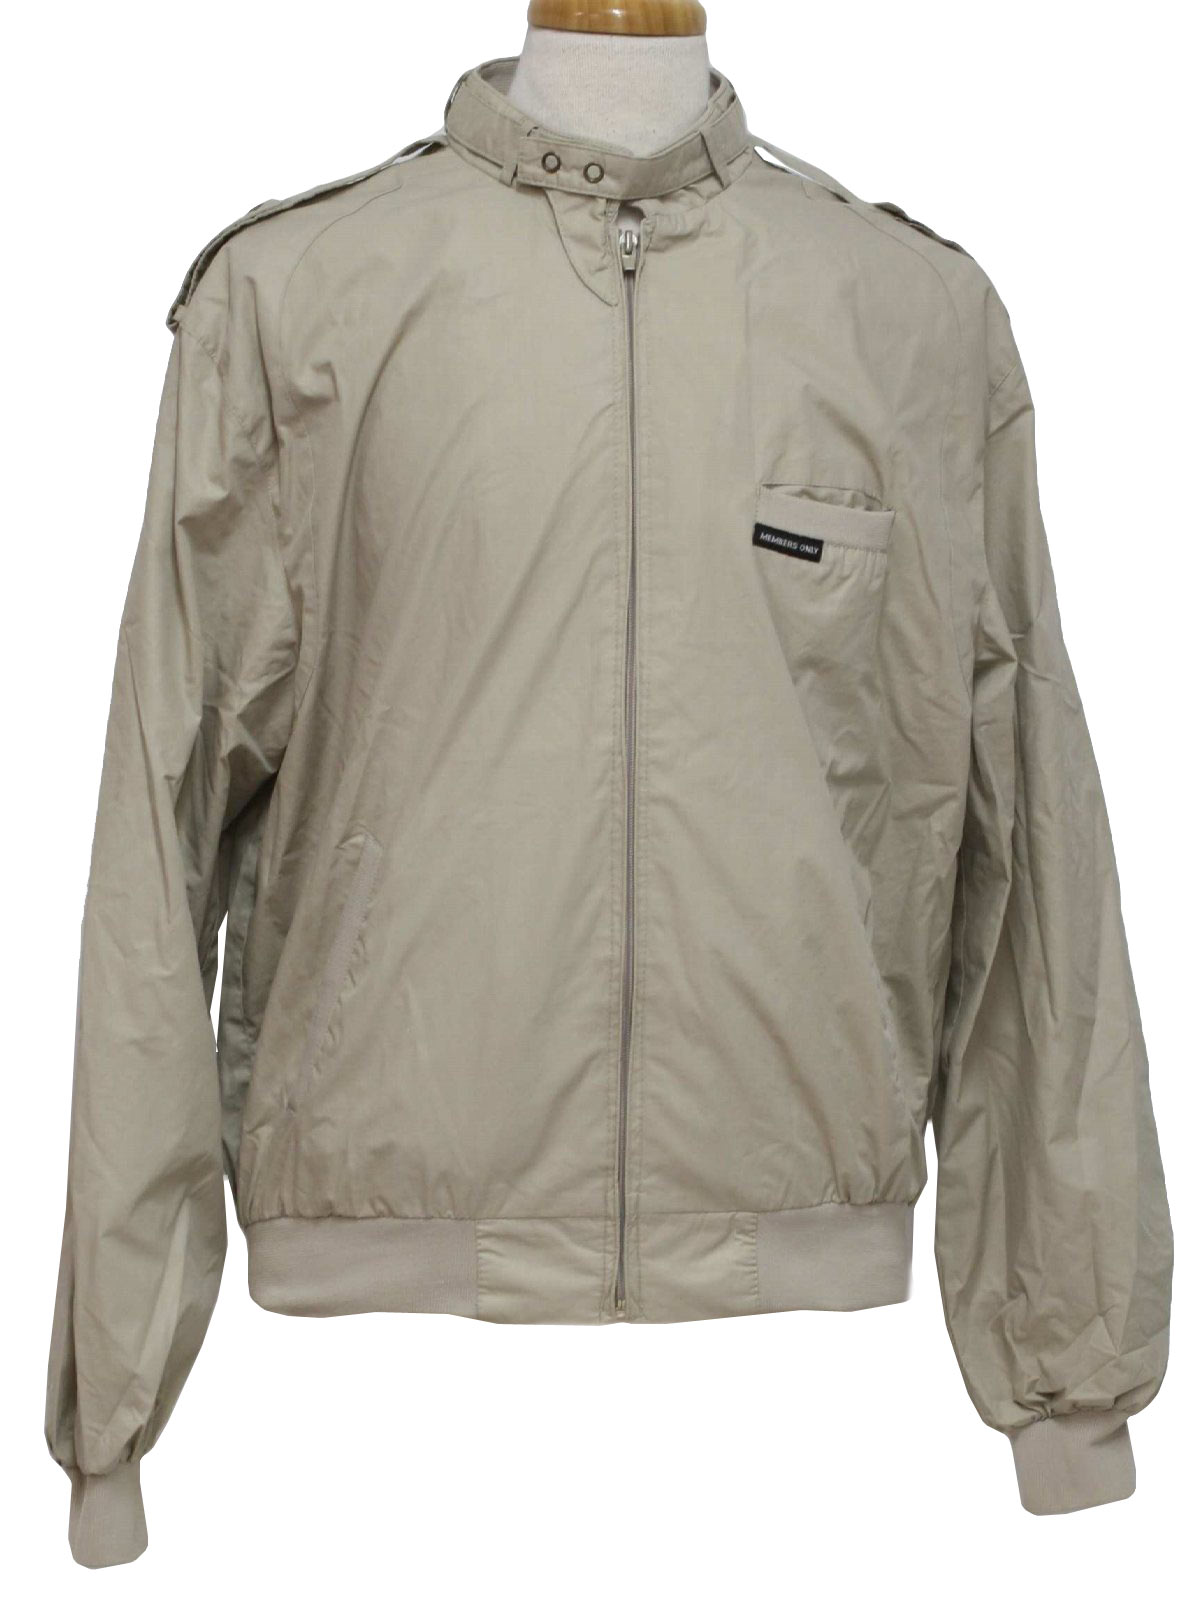 Retro 80s Jacket (Members Only) : 80s -Members Only- Mens tan cotton ...